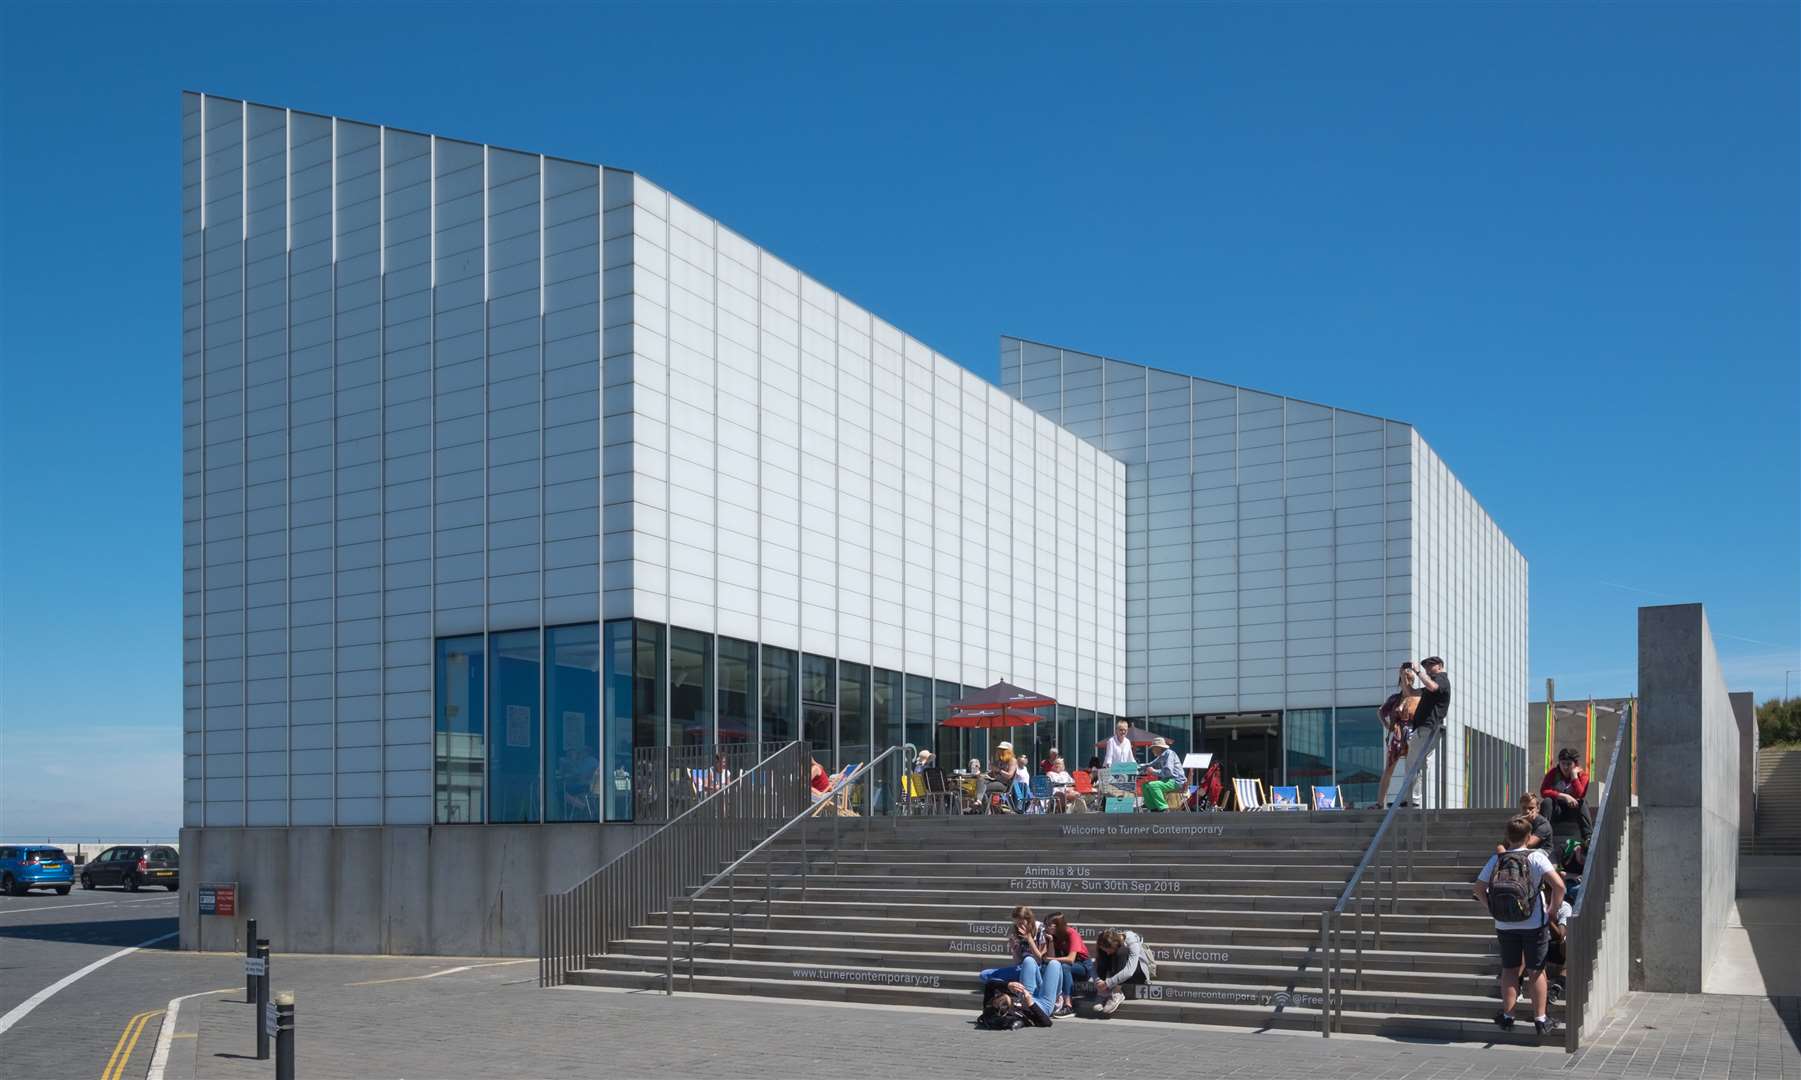 Turner Contemporary won its bid to host the Prize